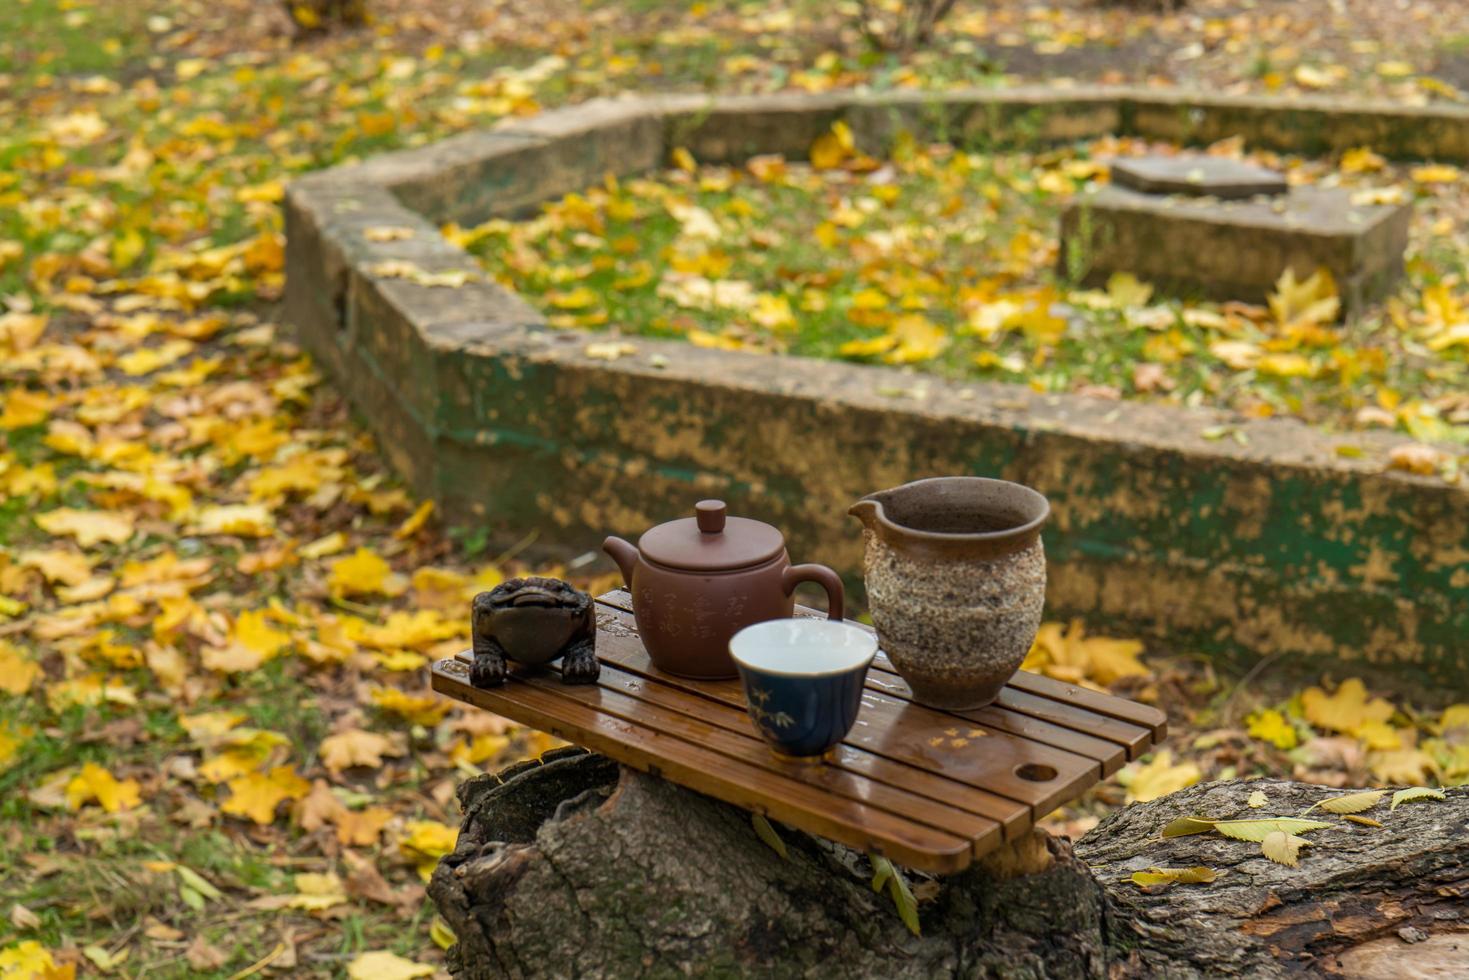 Teapot and teacups on a wooden table photo